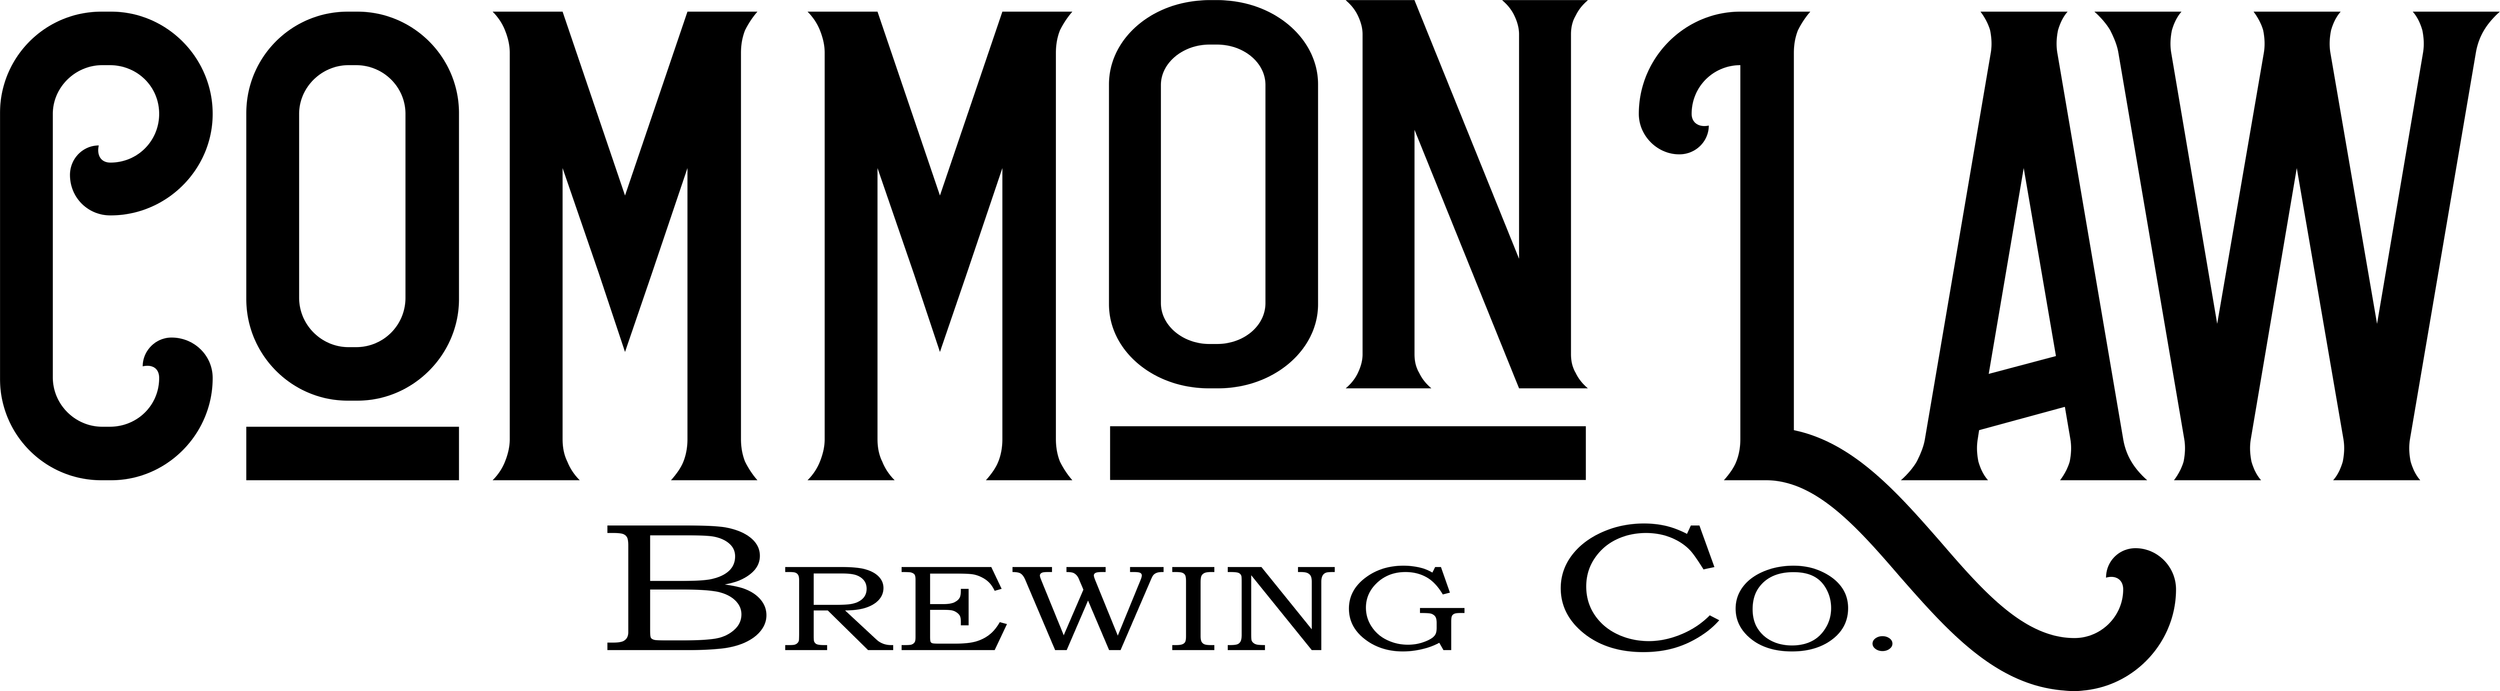 Common Law Brewing Big Logo (1).png